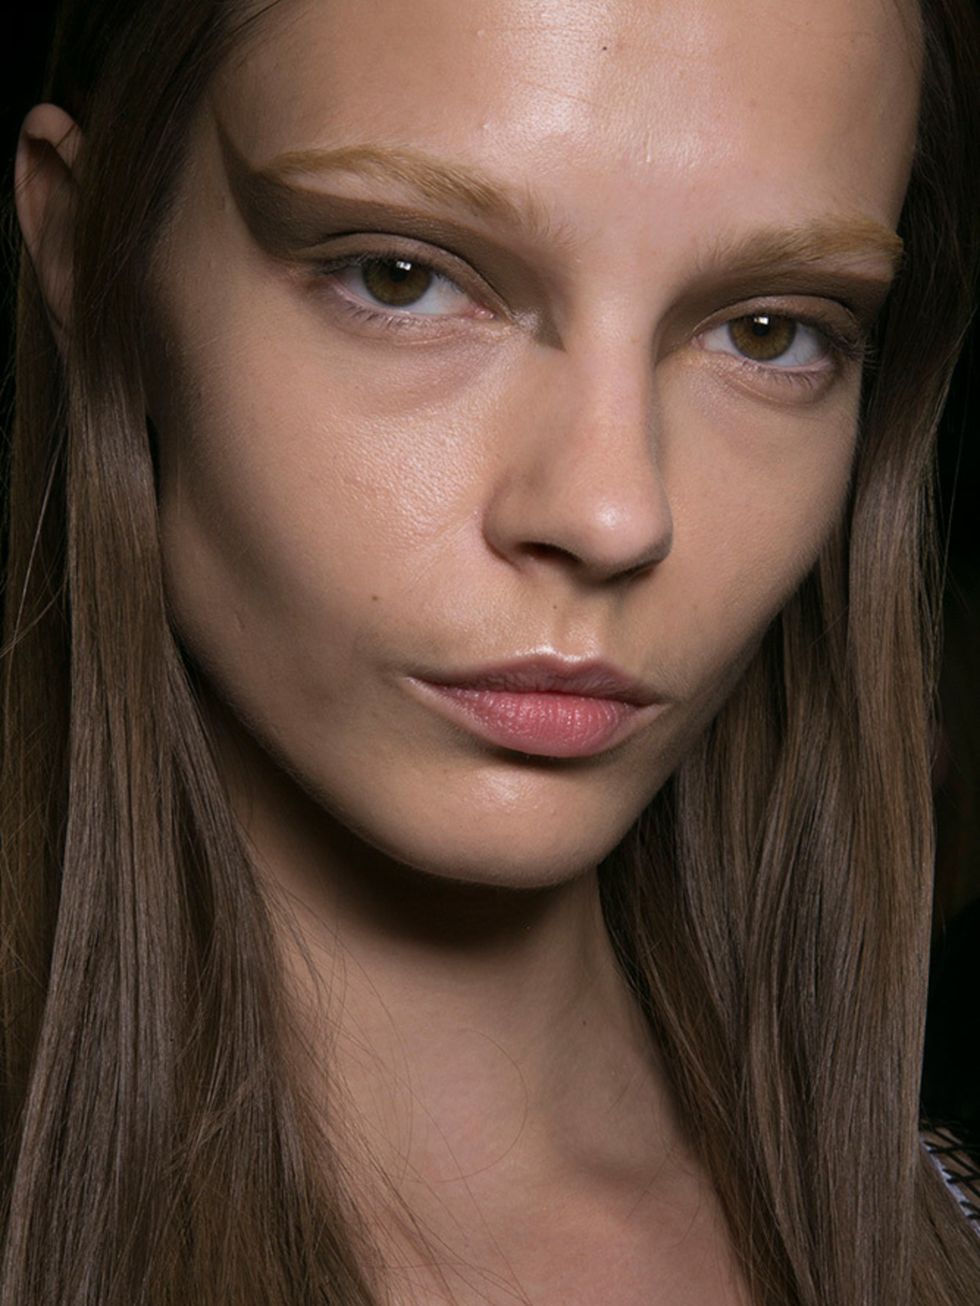 <p><a href="http://www.elleuk.com/catwalk/givenchy/spring-summer-2015">Givenchy </a></p>

<p>The look: Supersized bronze flick</p>

<p>Make-up artist: Pat McGrath</p>

<p>Key products: Bronze cream eyeshadow, brown mascara and eyebrow bleach.</p>

<p>Top 